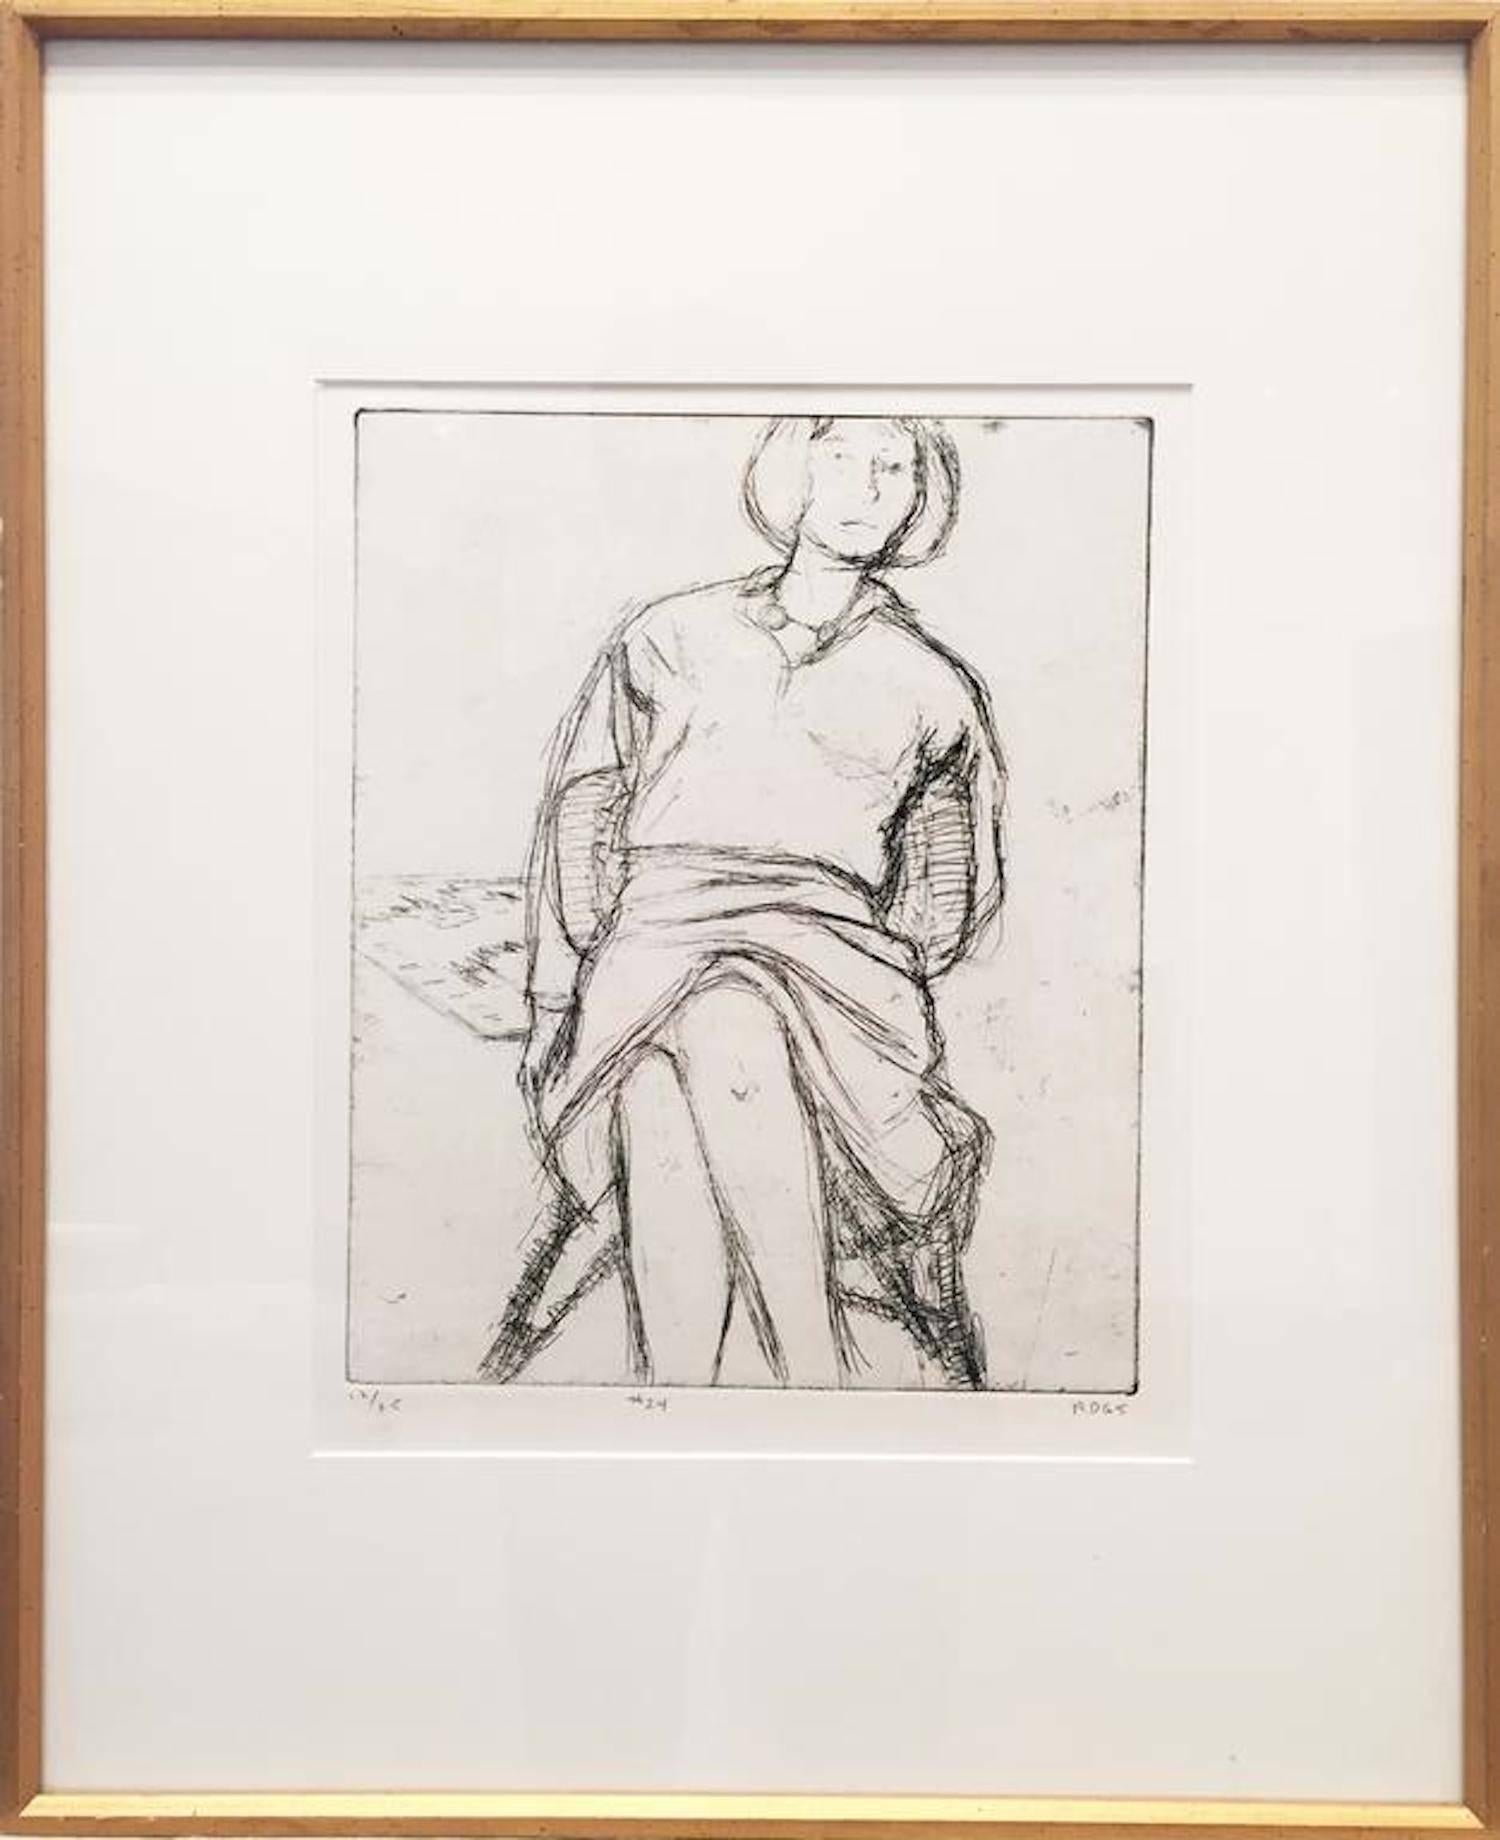 Richard Diebenkorn Figurative Print - #24 (Phyllis seated in rattan chair) from 41 Etchings Drypoints